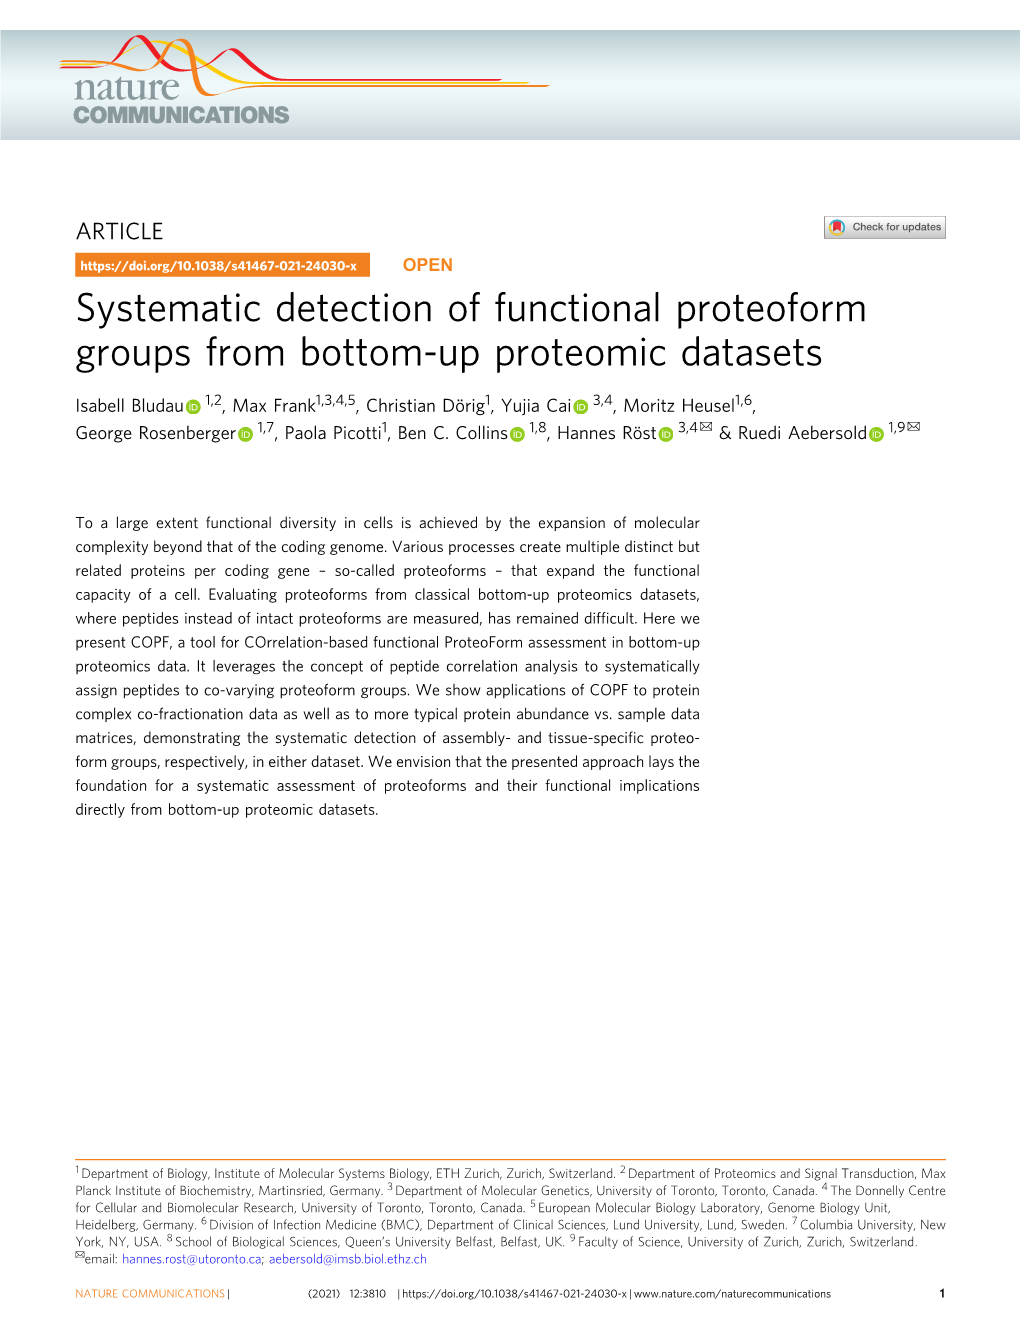 Systematic Detection of Functional Proteoform Groups from Bottom-Up Proteomic Datasets